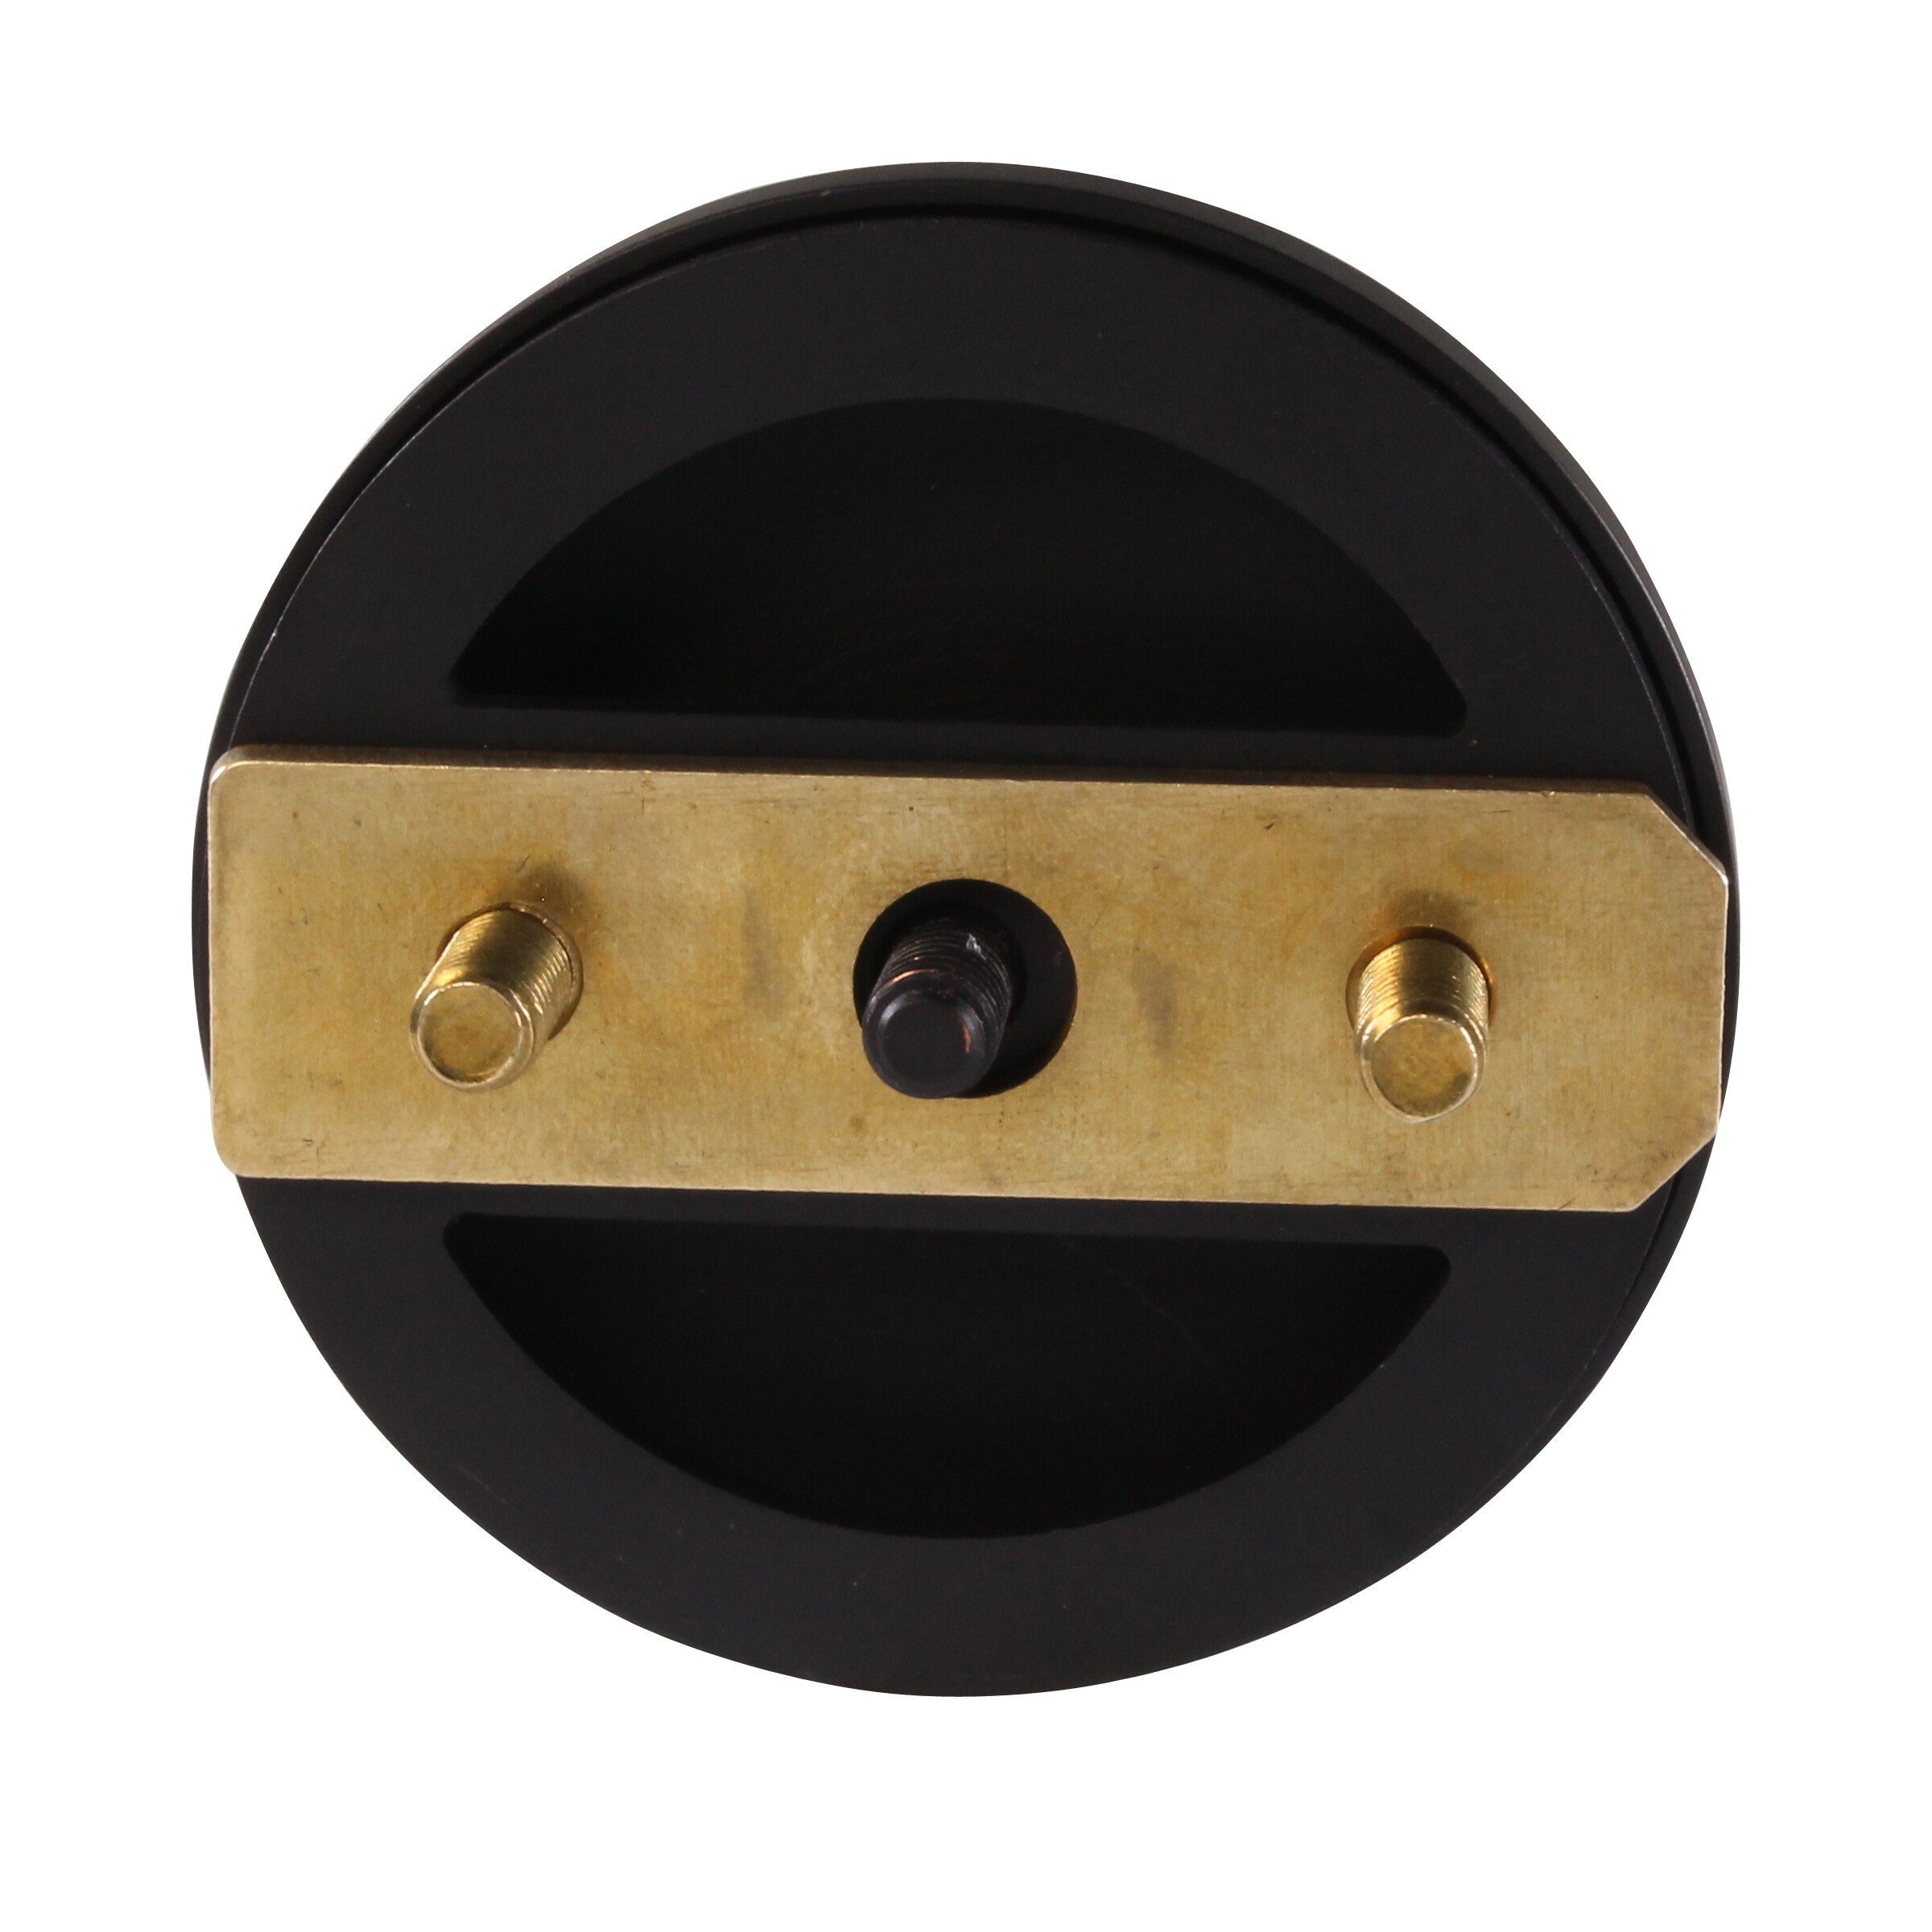 Westbrass Trip Lever Faceplate with Beehive Grid Tub Trim Grate Matte Black D92-62